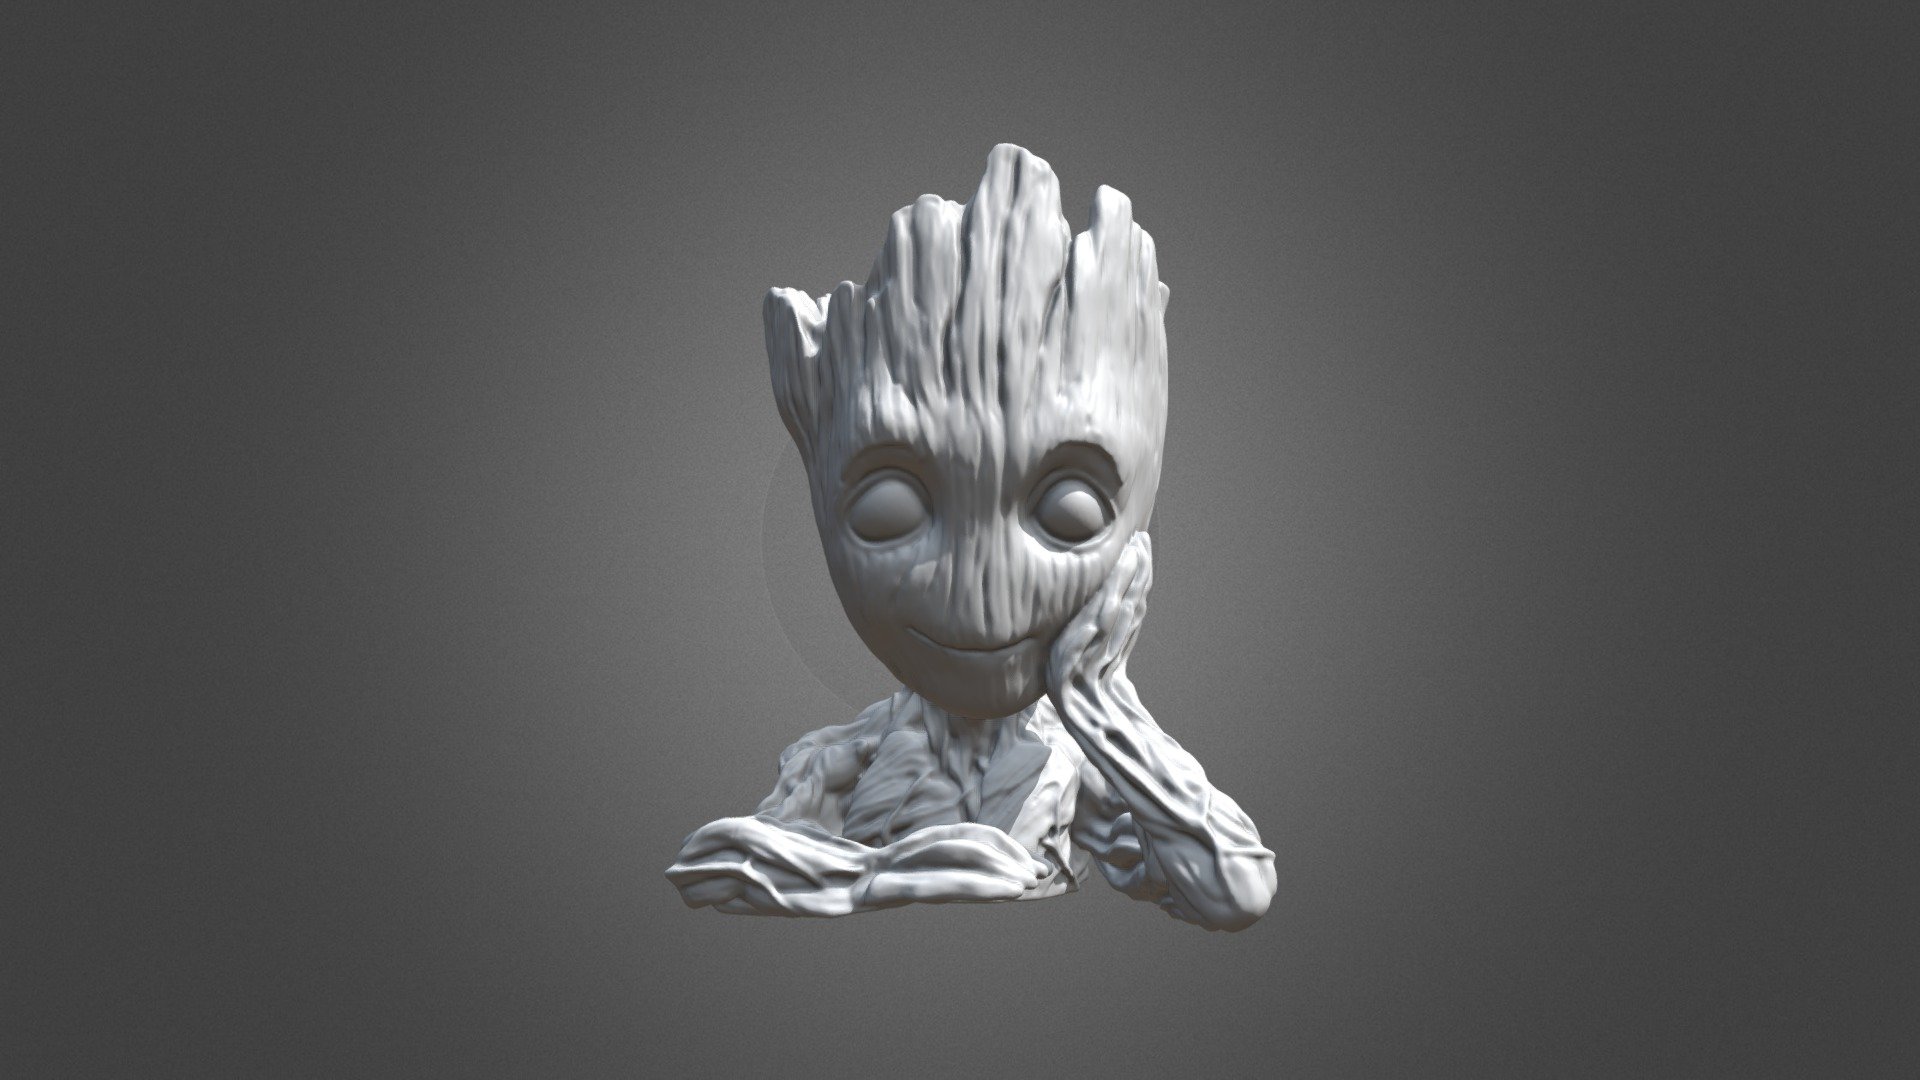 Groot (Structured Light)